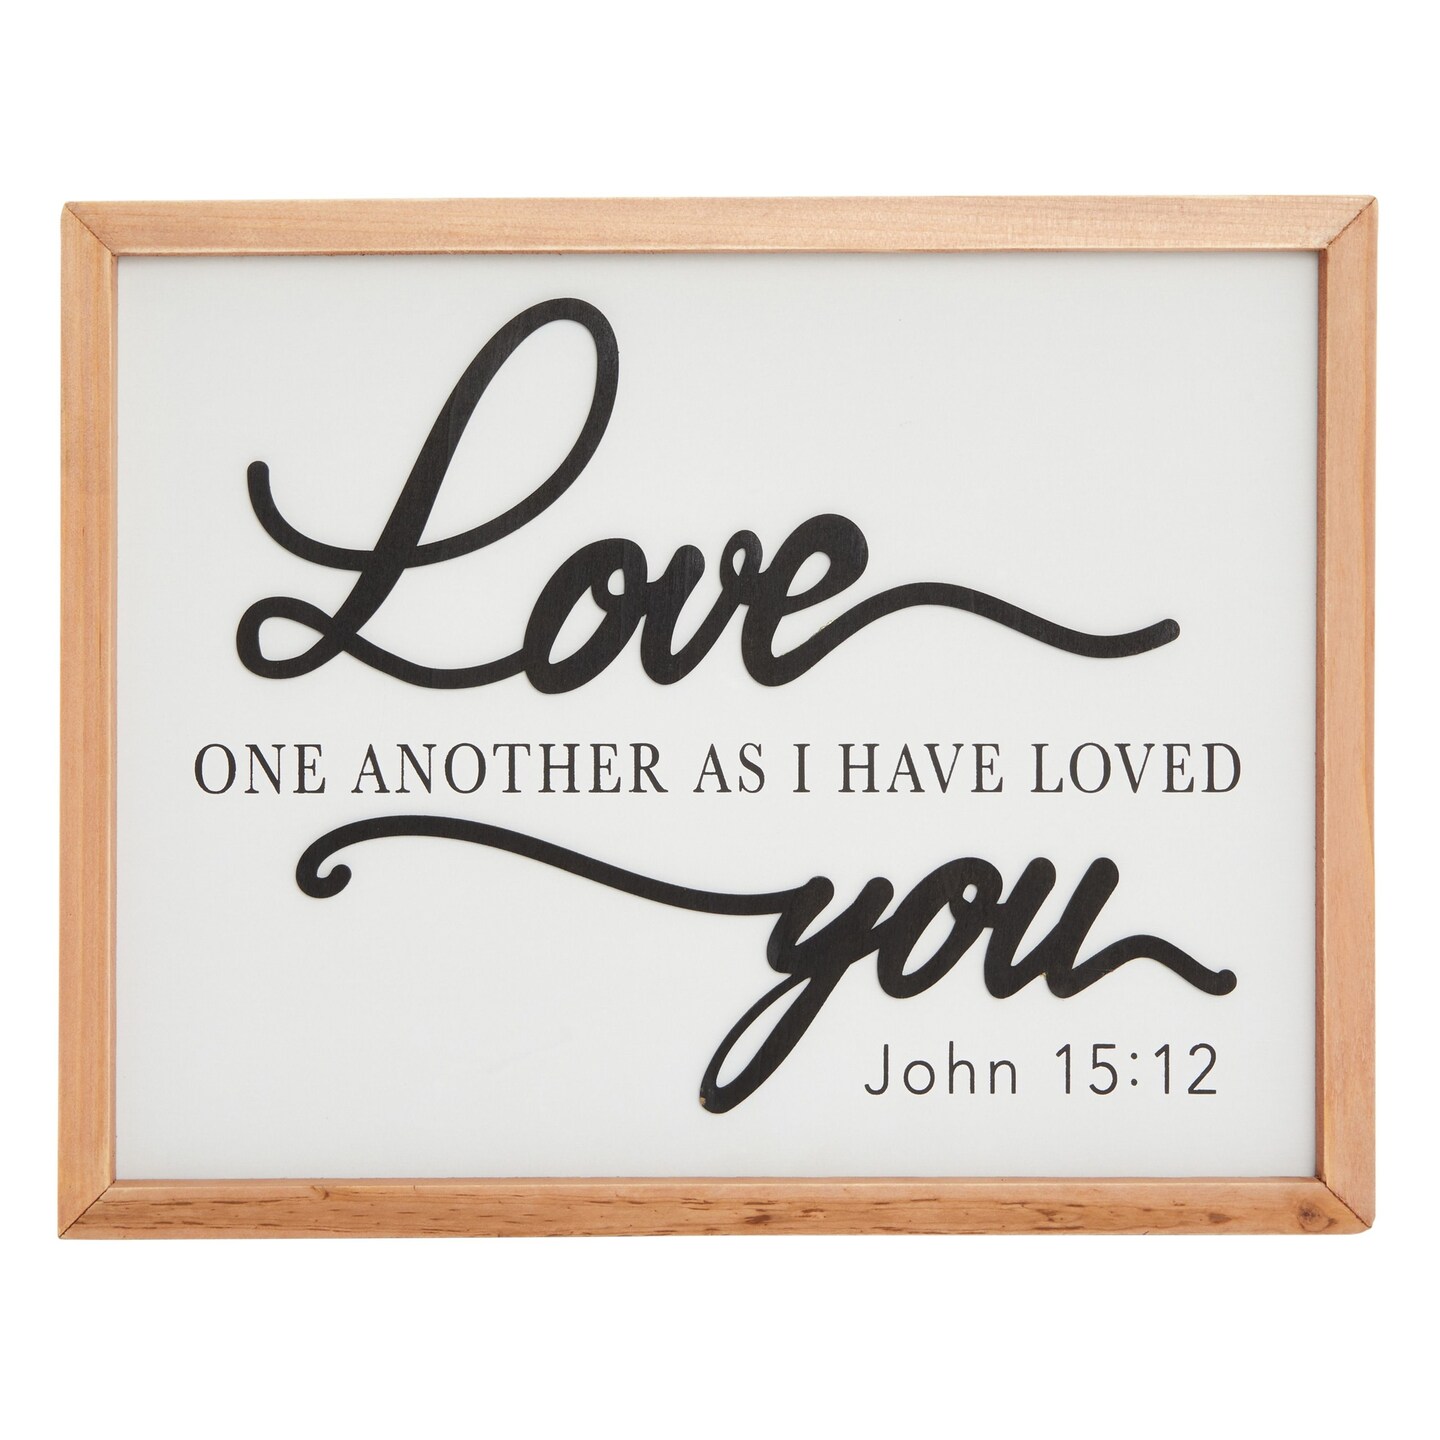 Wooden Farmhouse Christian Wall Decor Sign, John 15:12 Bible Verse, Love One Another As I Have Loved You (12 x 15 In)